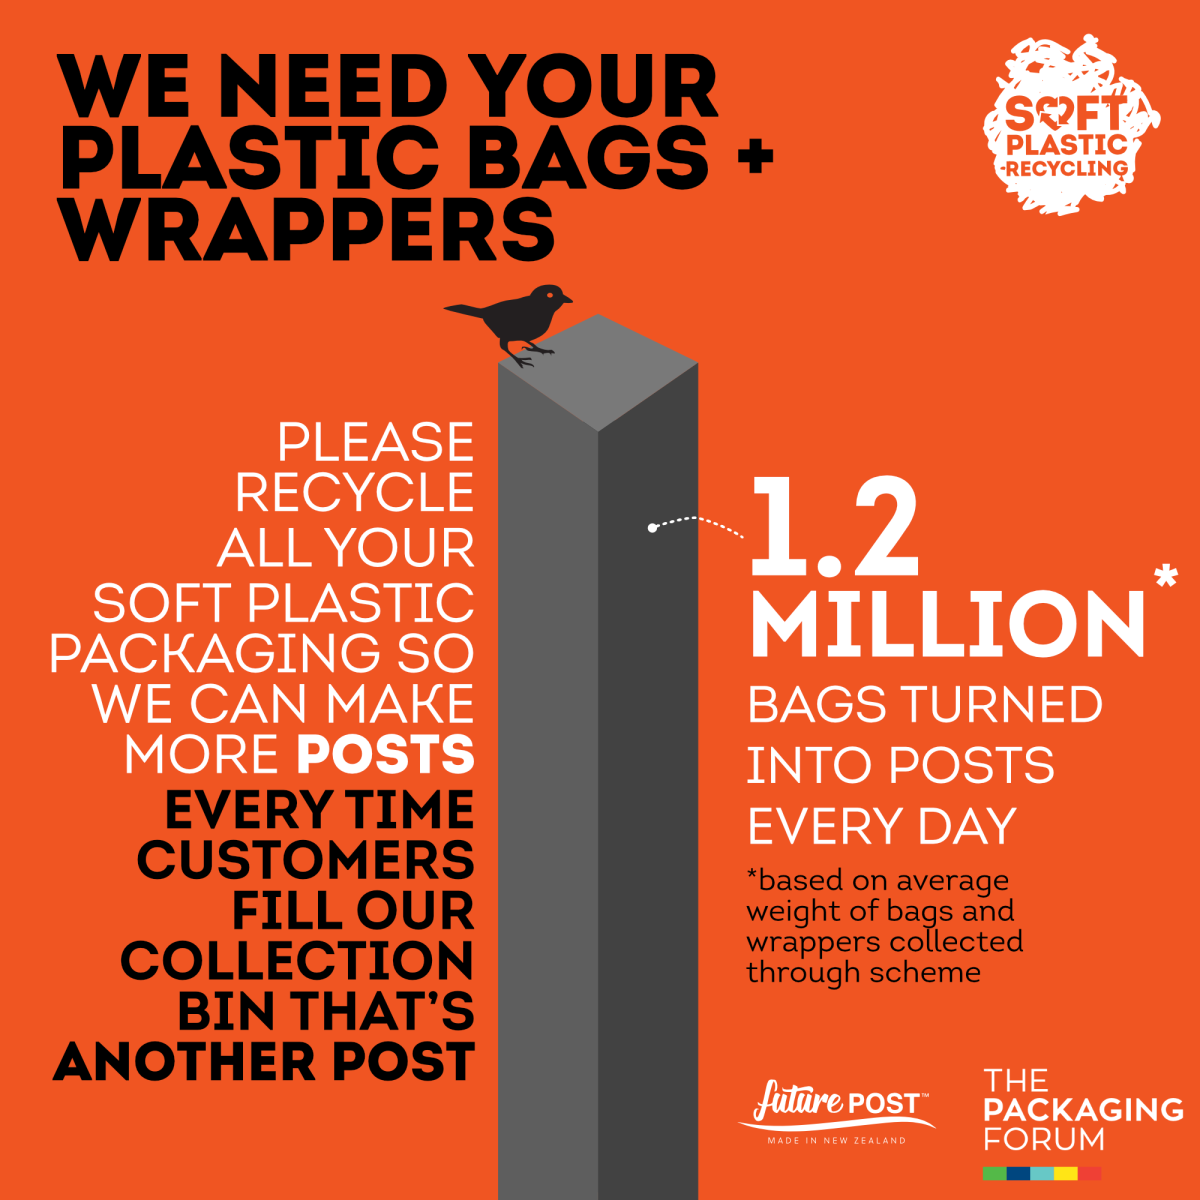 We want your soft plastic bags and wrappers!